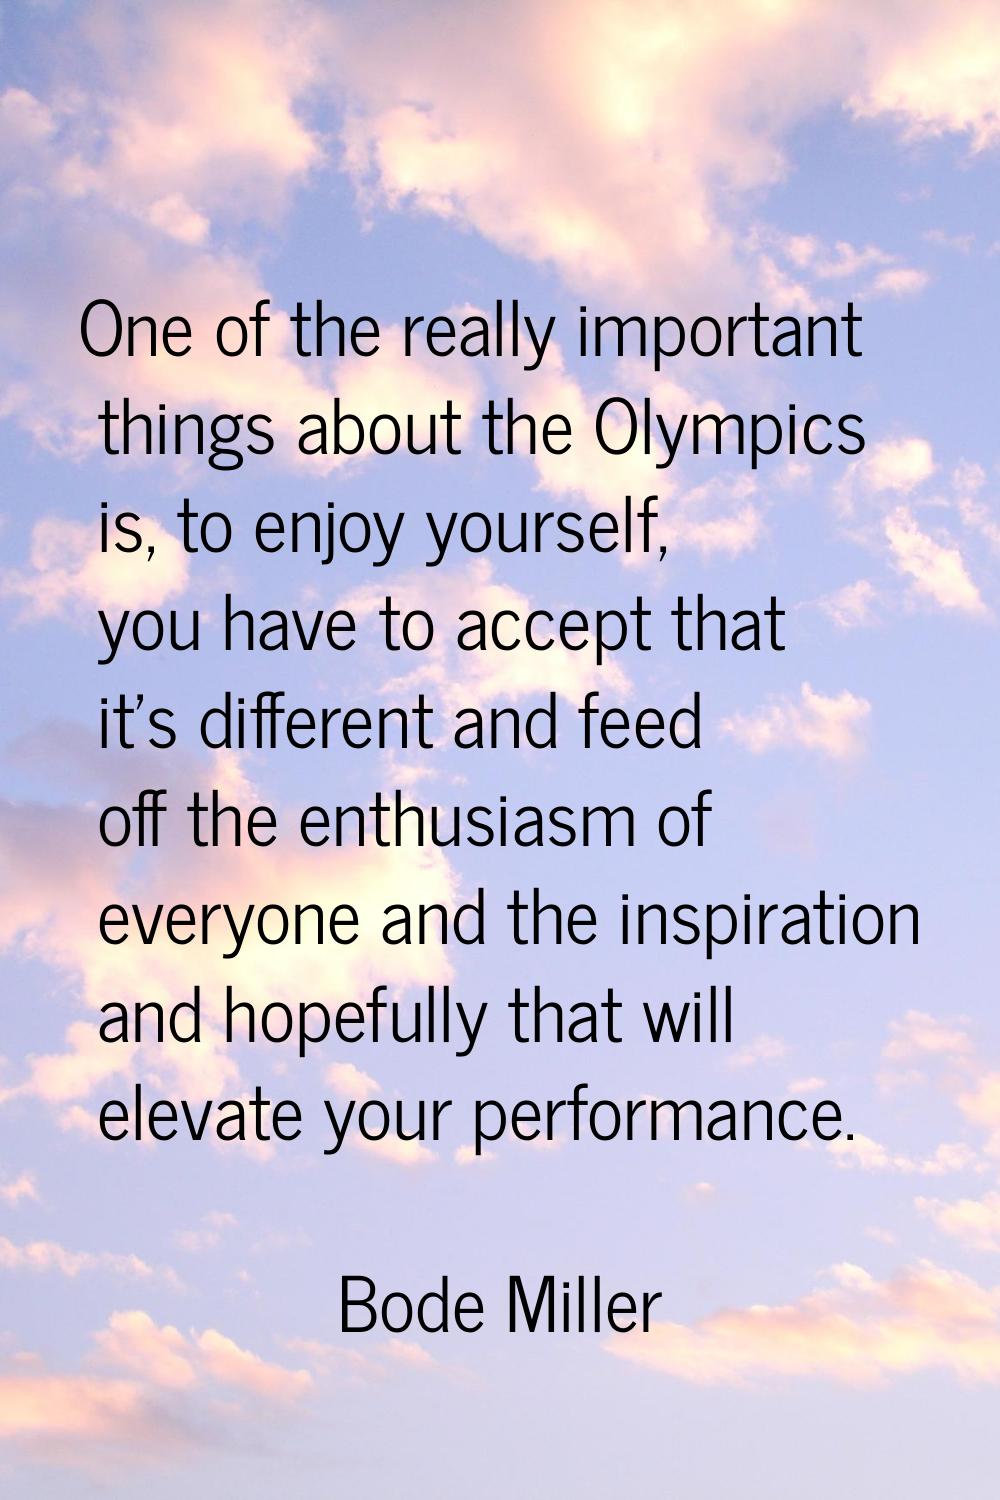 One of the really important things about the Olympics is, to enjoy yourself, you have to accept tha